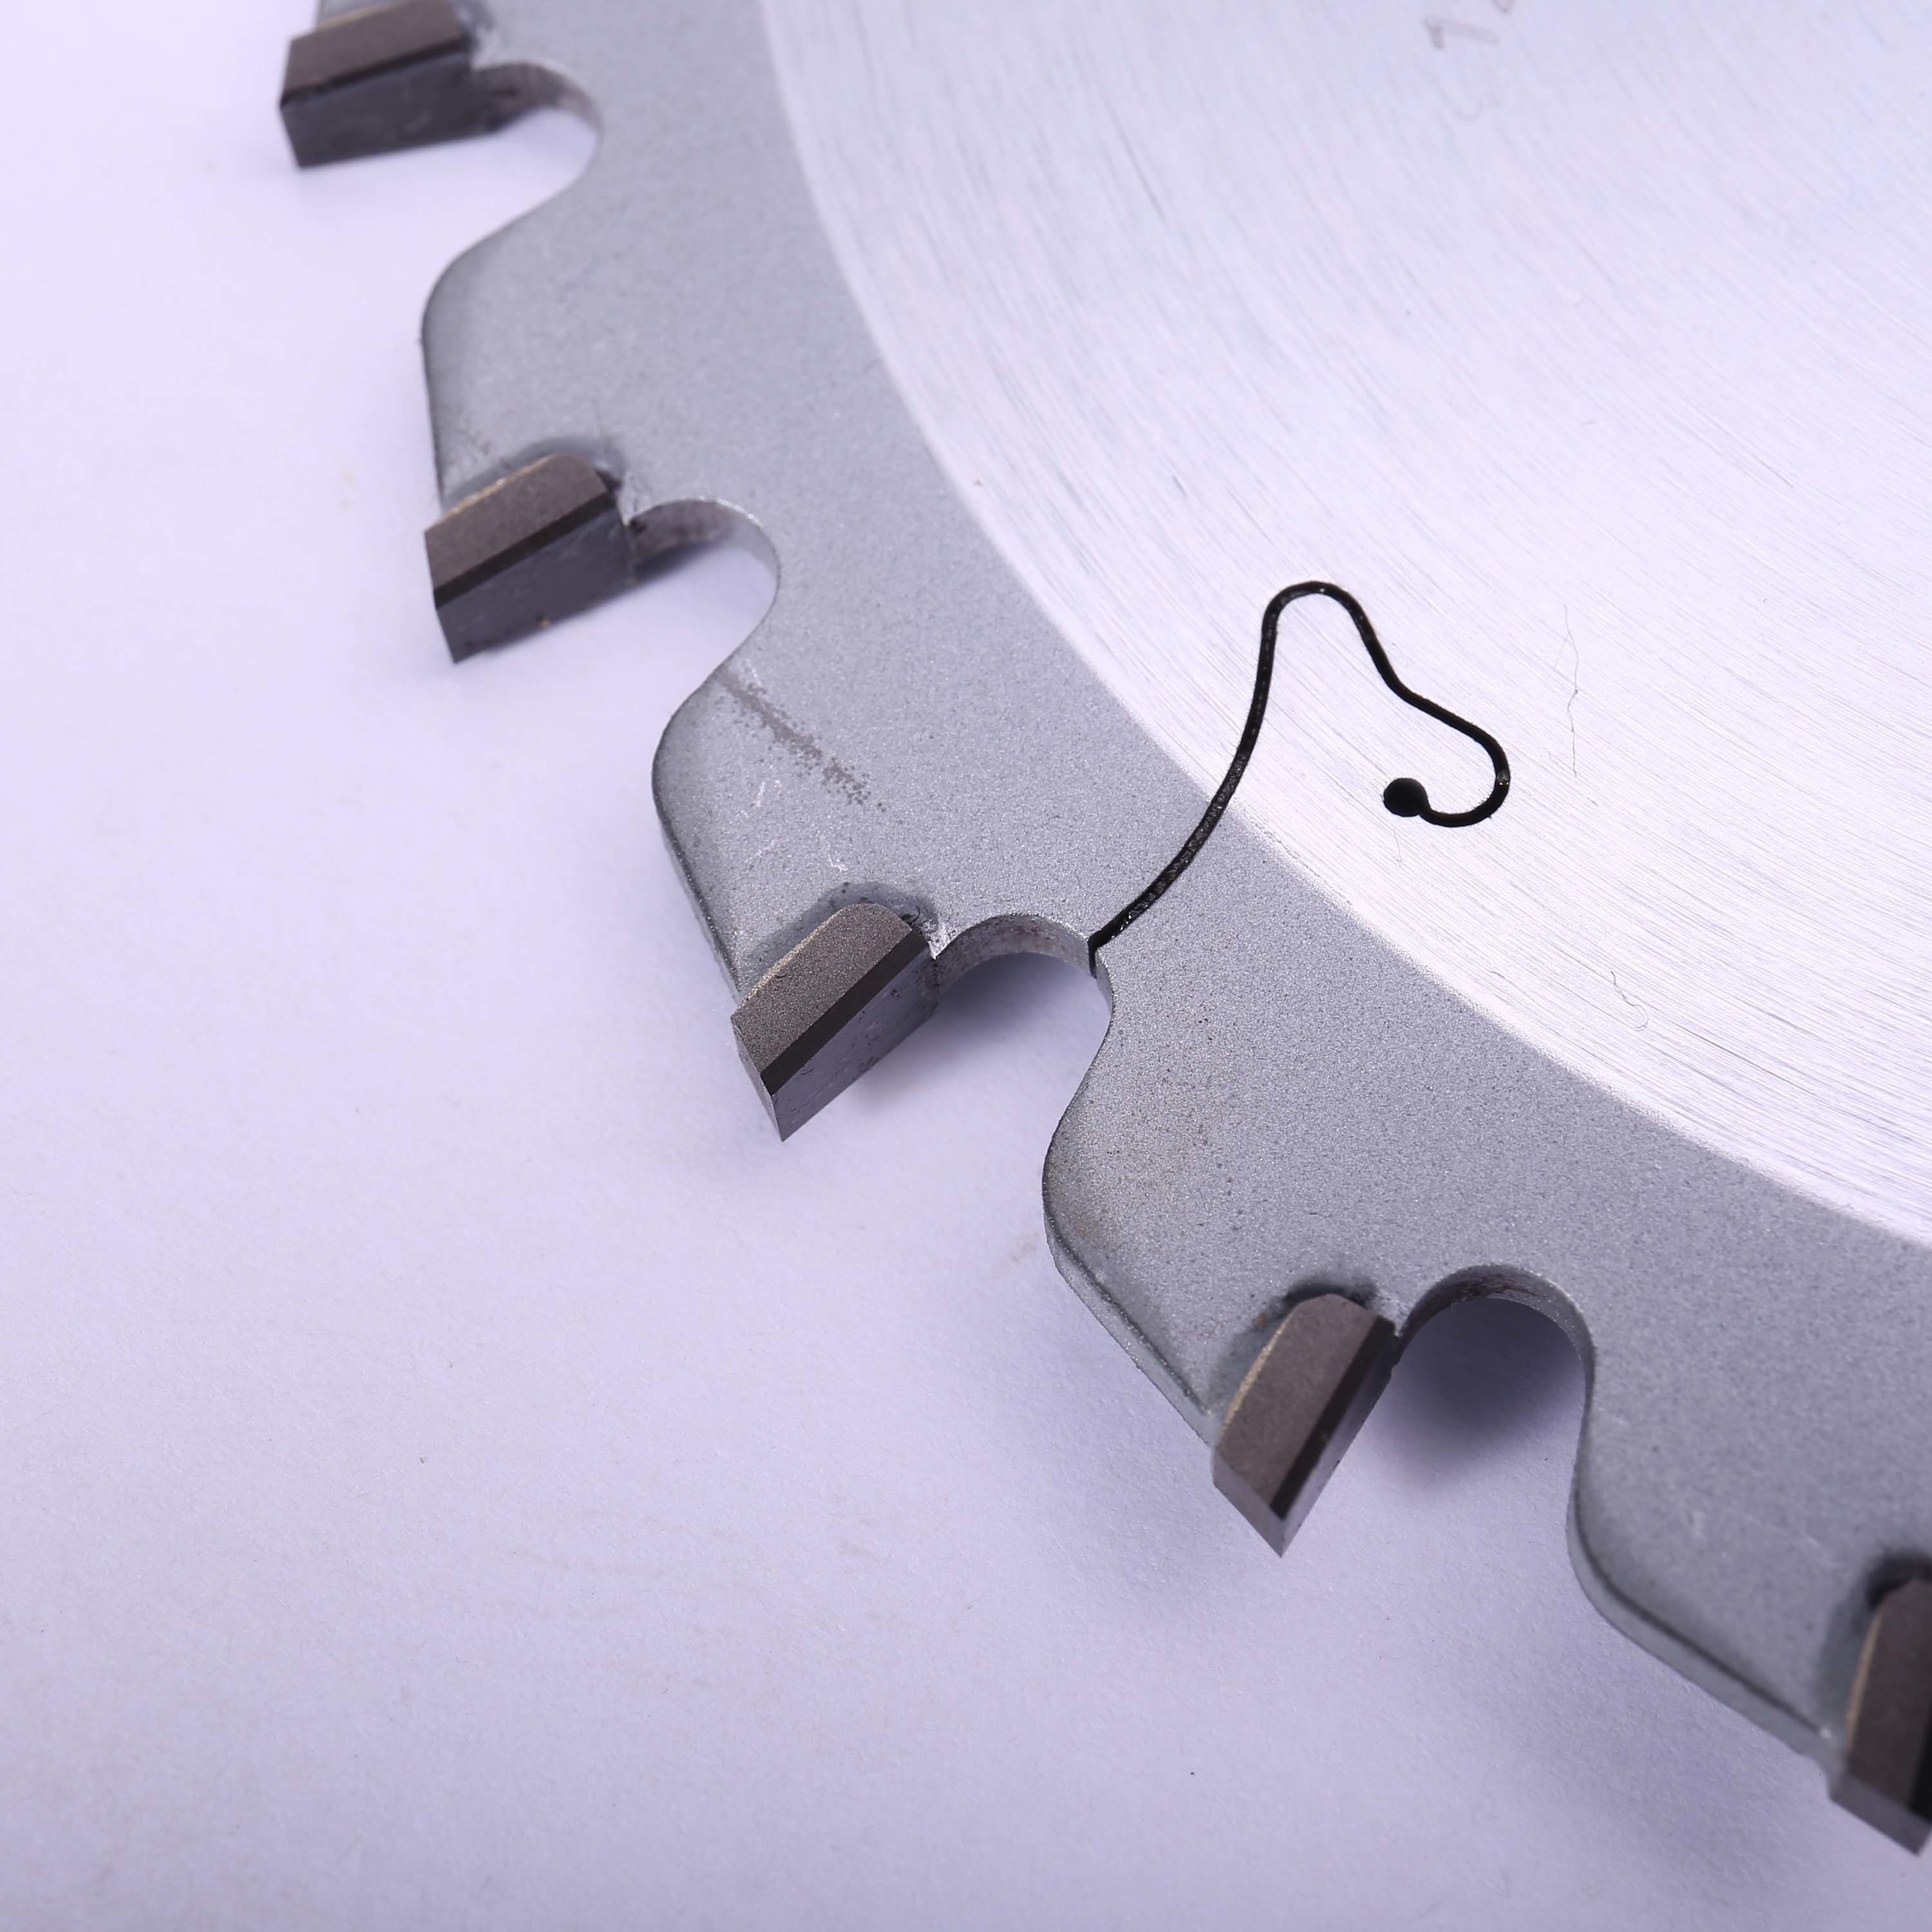 PCD Scoring Saw Blades for Laminated Chipboard, MDF, Plywood.